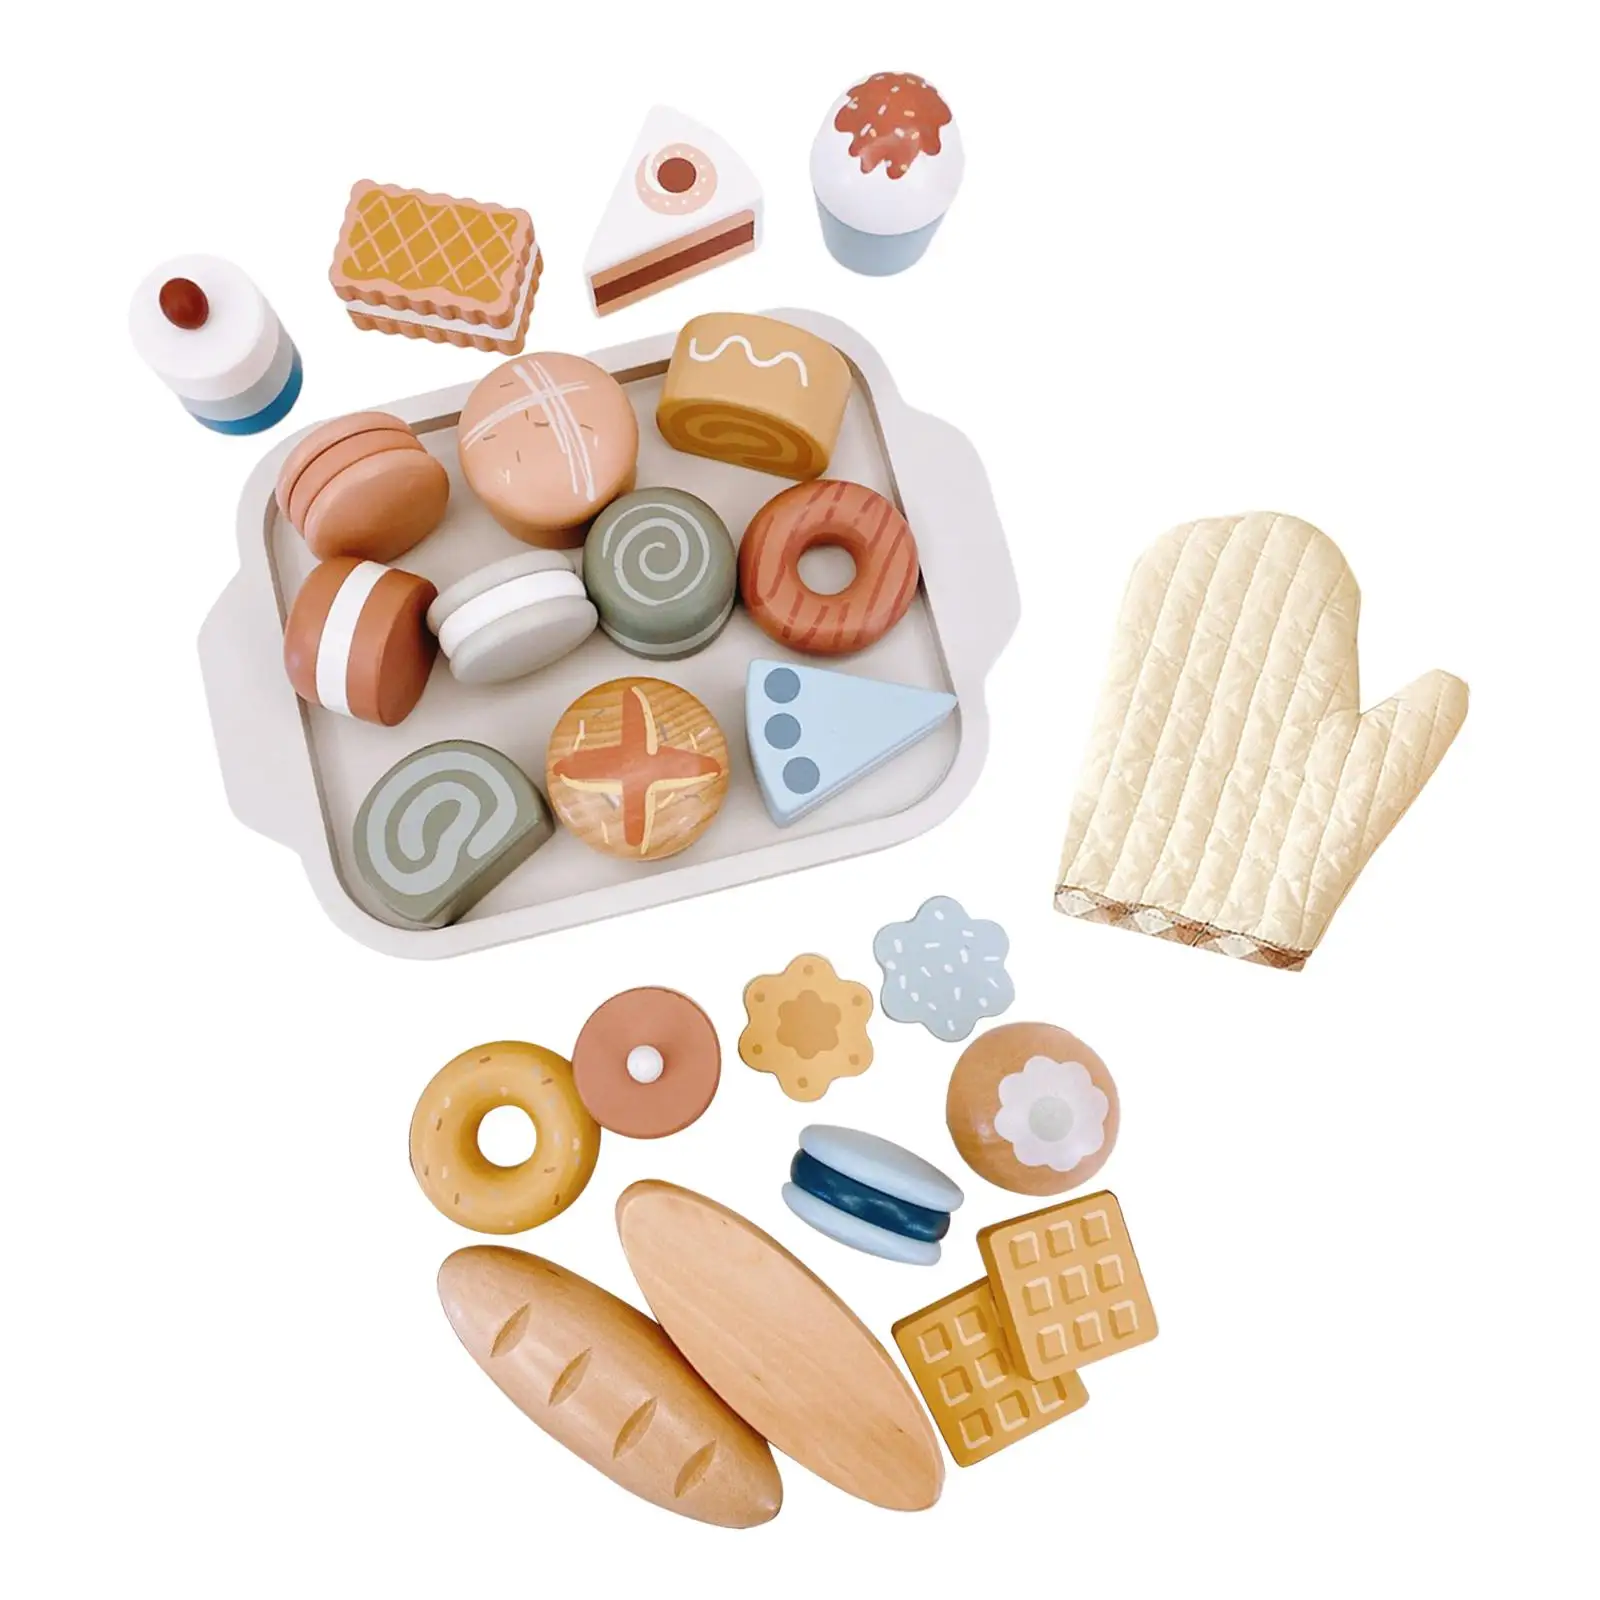 Pretend Play Food Set Preschool Realistic Cakes Play Food Set for Furnishings Crafts Handcraft Landscape Decorations Birthday